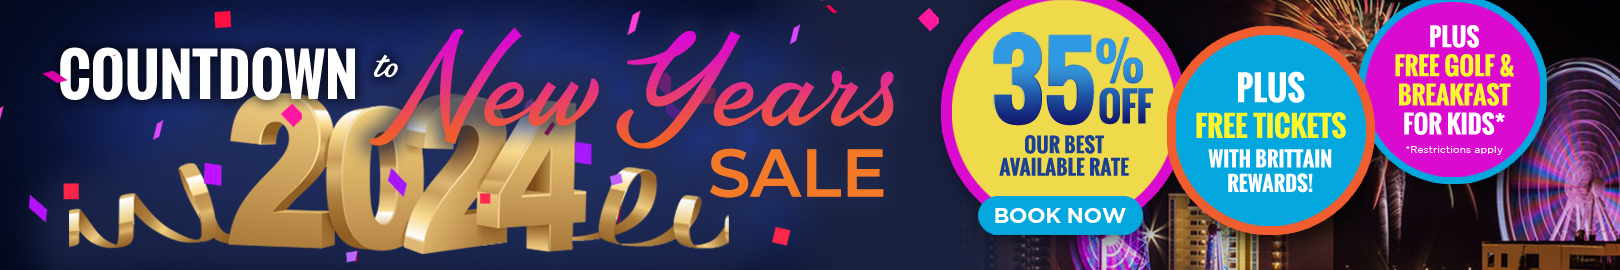 Countdown to New Year's Sale - 40% Off and Free Attraction Tickets